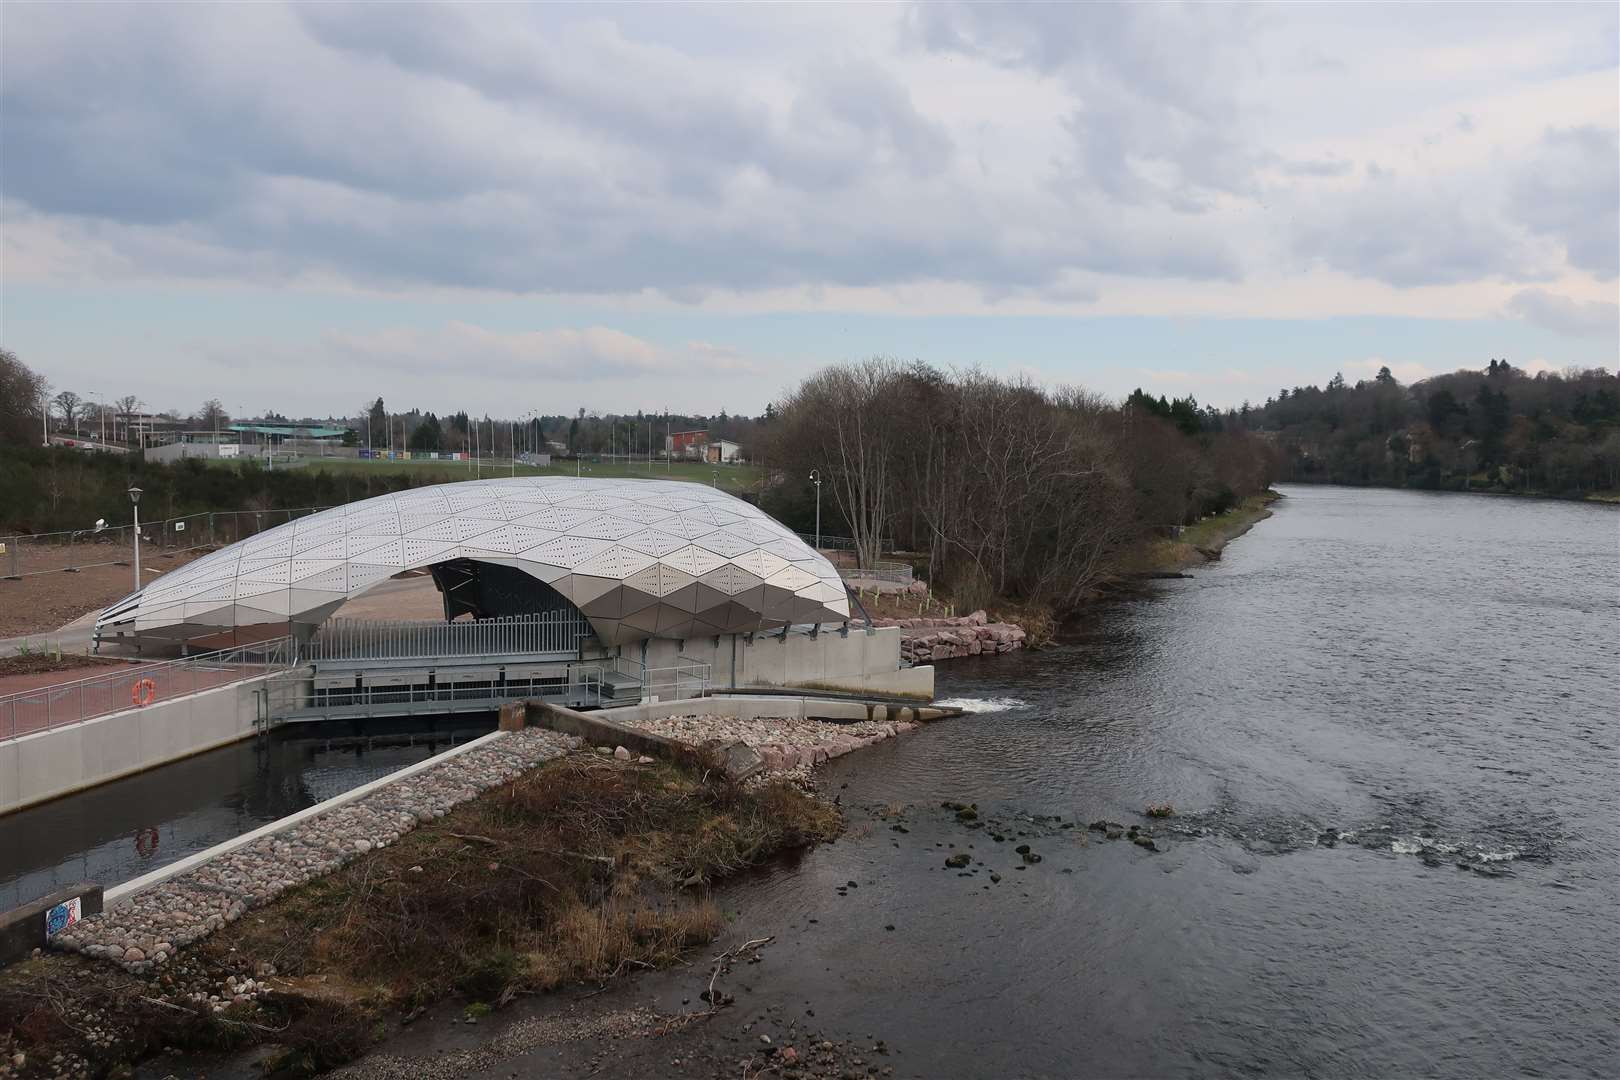 The Hydro Ness energy scheme is nearing completion below the Holm Mills Bridge.